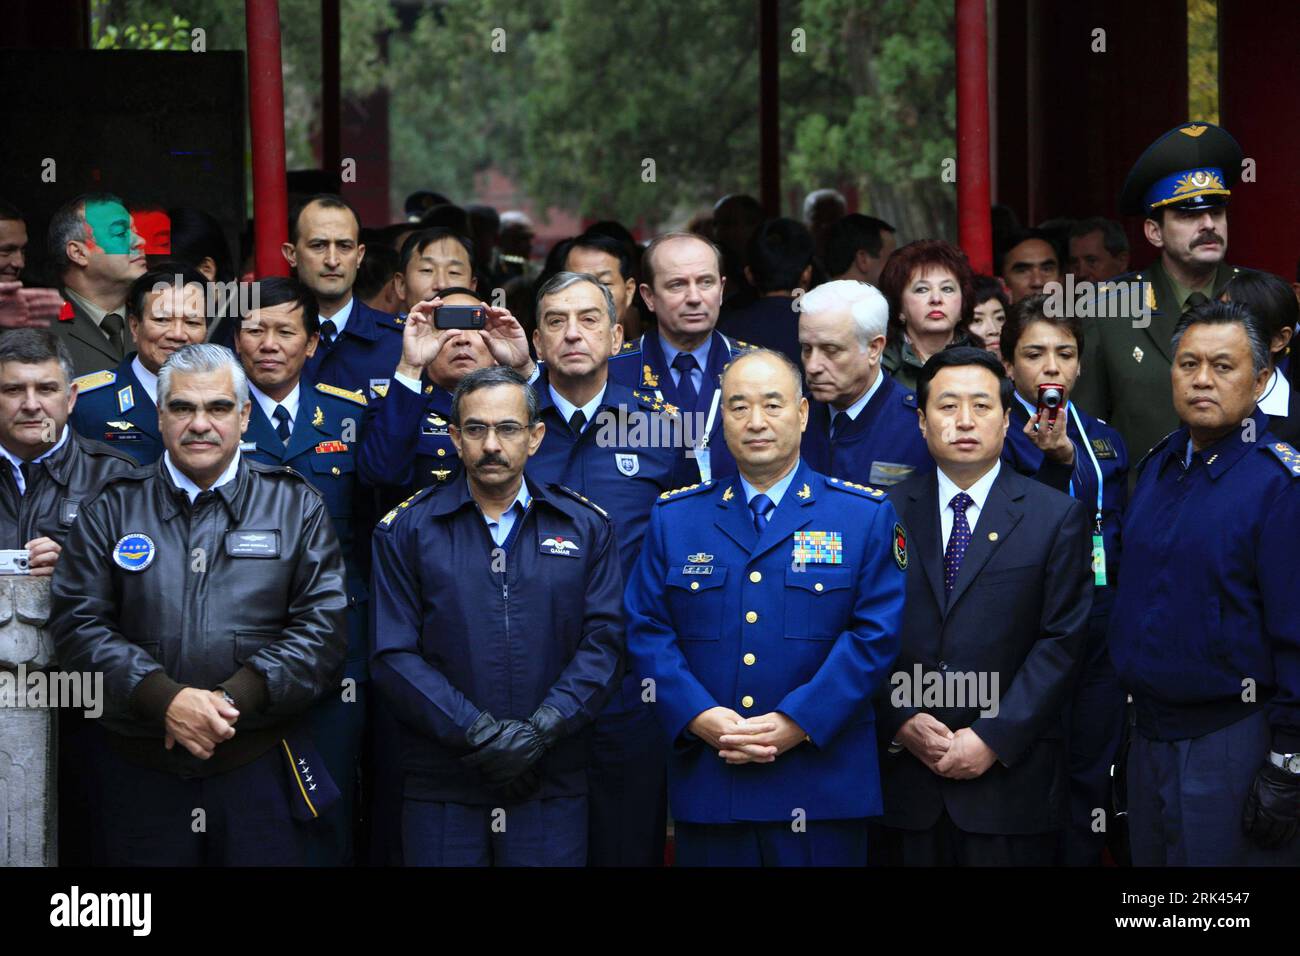 Bildnummer: 53587728  Datum: 09.11.2009  Copyright: imago/Xinhua (091109) -- QUFU, Nov. 9, 2009 (Xinhua) -- Chinese  Liberation Army Air Force Commander Xu Qiliang (3rd R, front) and foreign air force representatives pose for a group photo at the Confucius Temple in Qufu, east China s Shandong Province, Nov. 9, 2009. Air force representatives of 32 foreign countries, who have attended an international forum on peace and development marking the 60th anniversary of the founding of the Air Force of the Chinese  Liberation Army, on Monday visited Qufu, the birthplace of the great thinker and philo Stock Photo